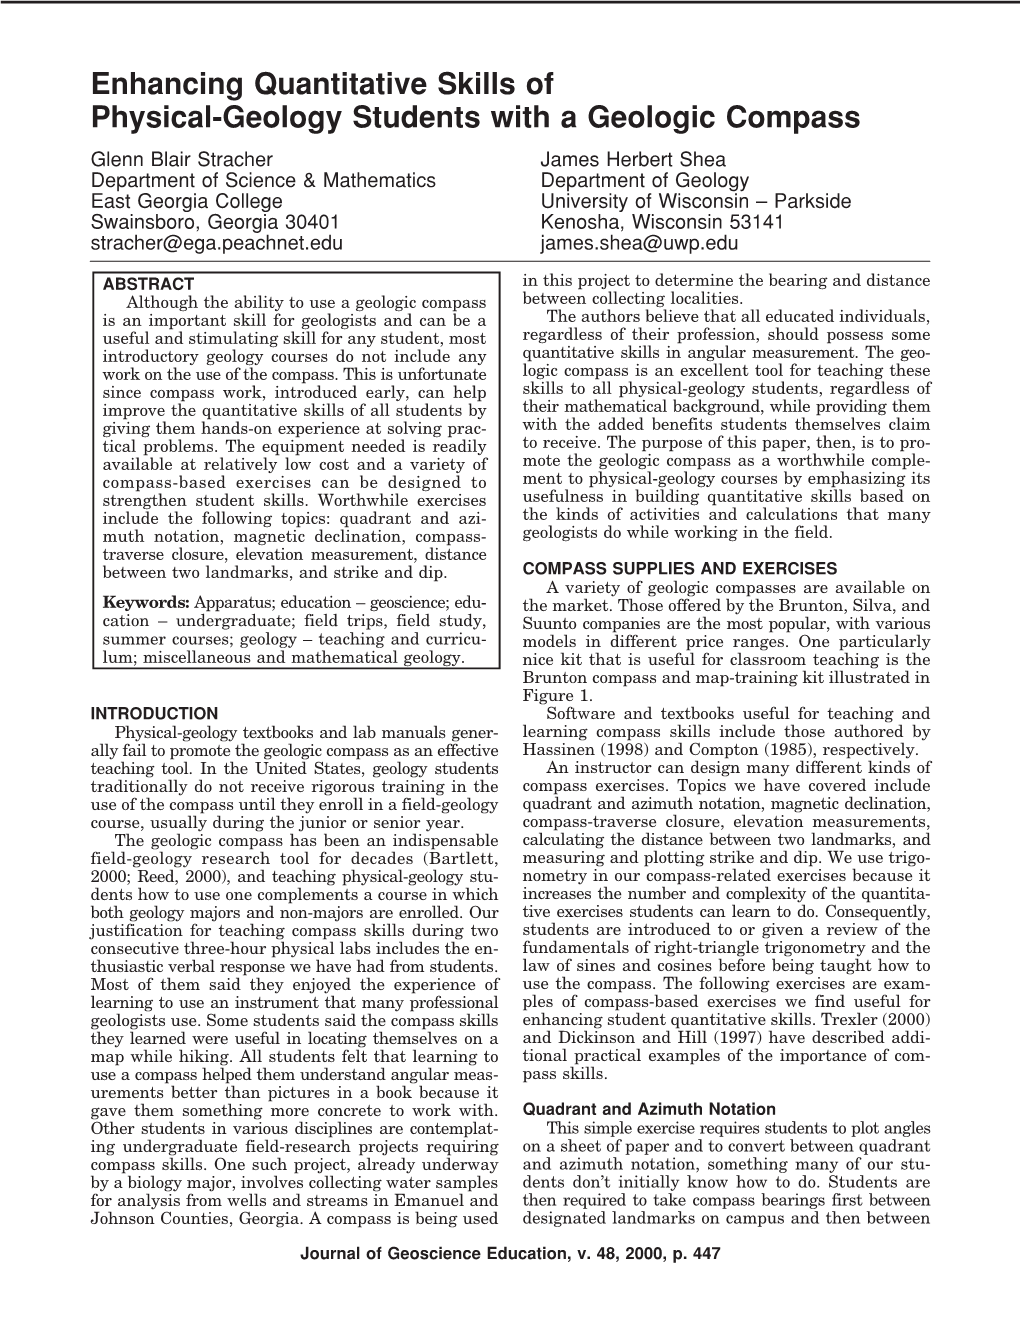 Enhancing Quantitative Skills of Physical-Geology Students with A